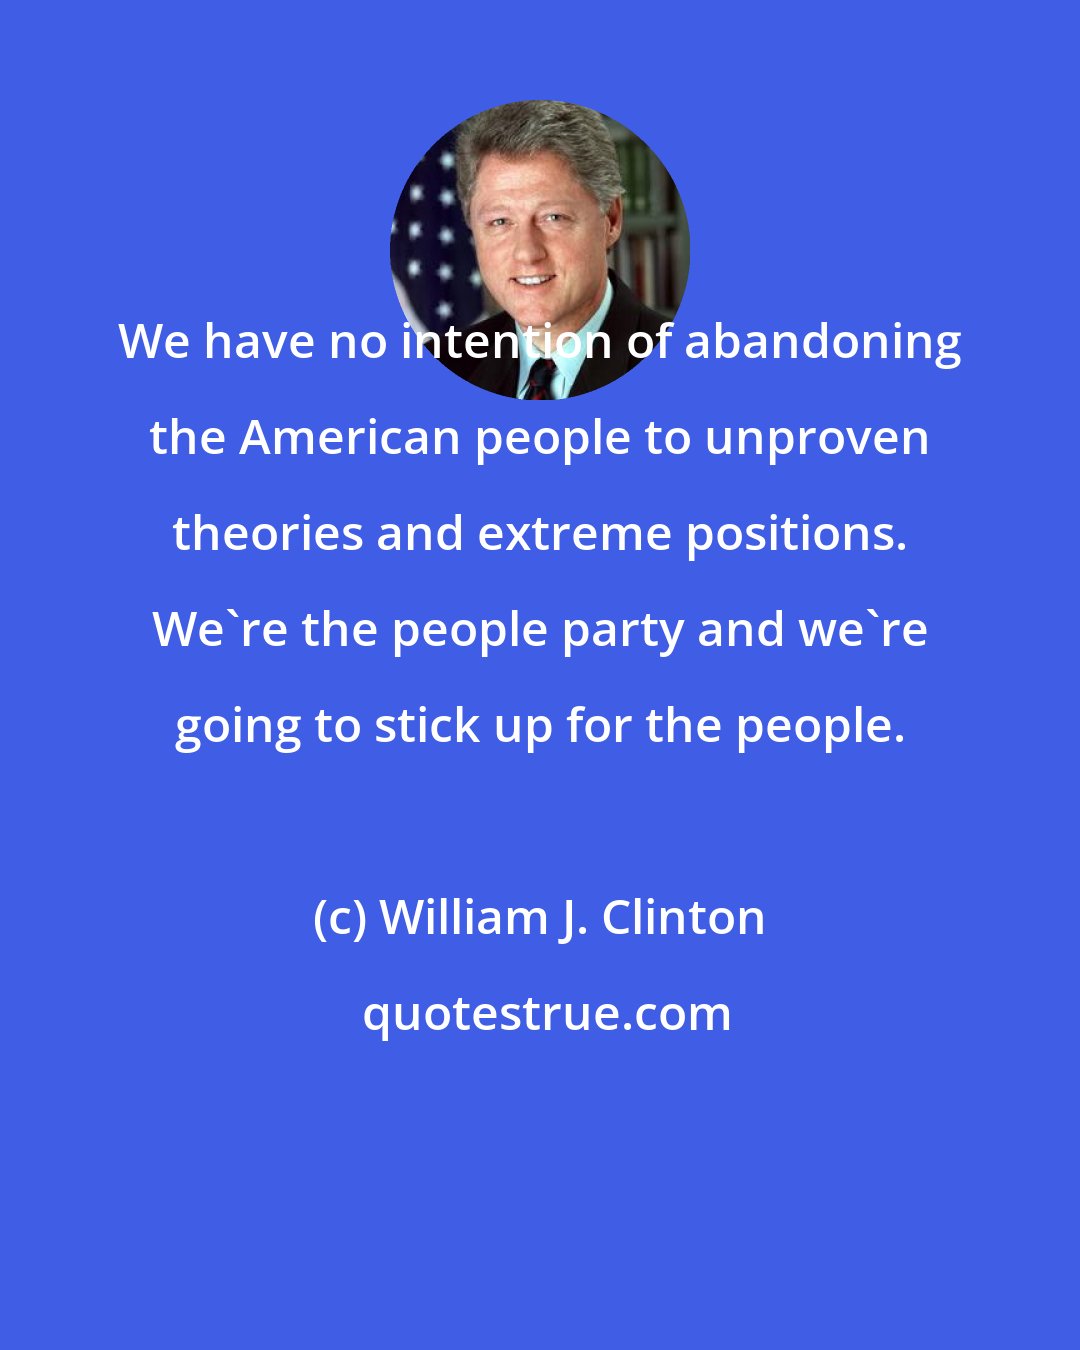 William J. Clinton: We have no intention of abandoning the American people to unproven theories and extreme positions. We're the people party and we're going to stick up for the people.